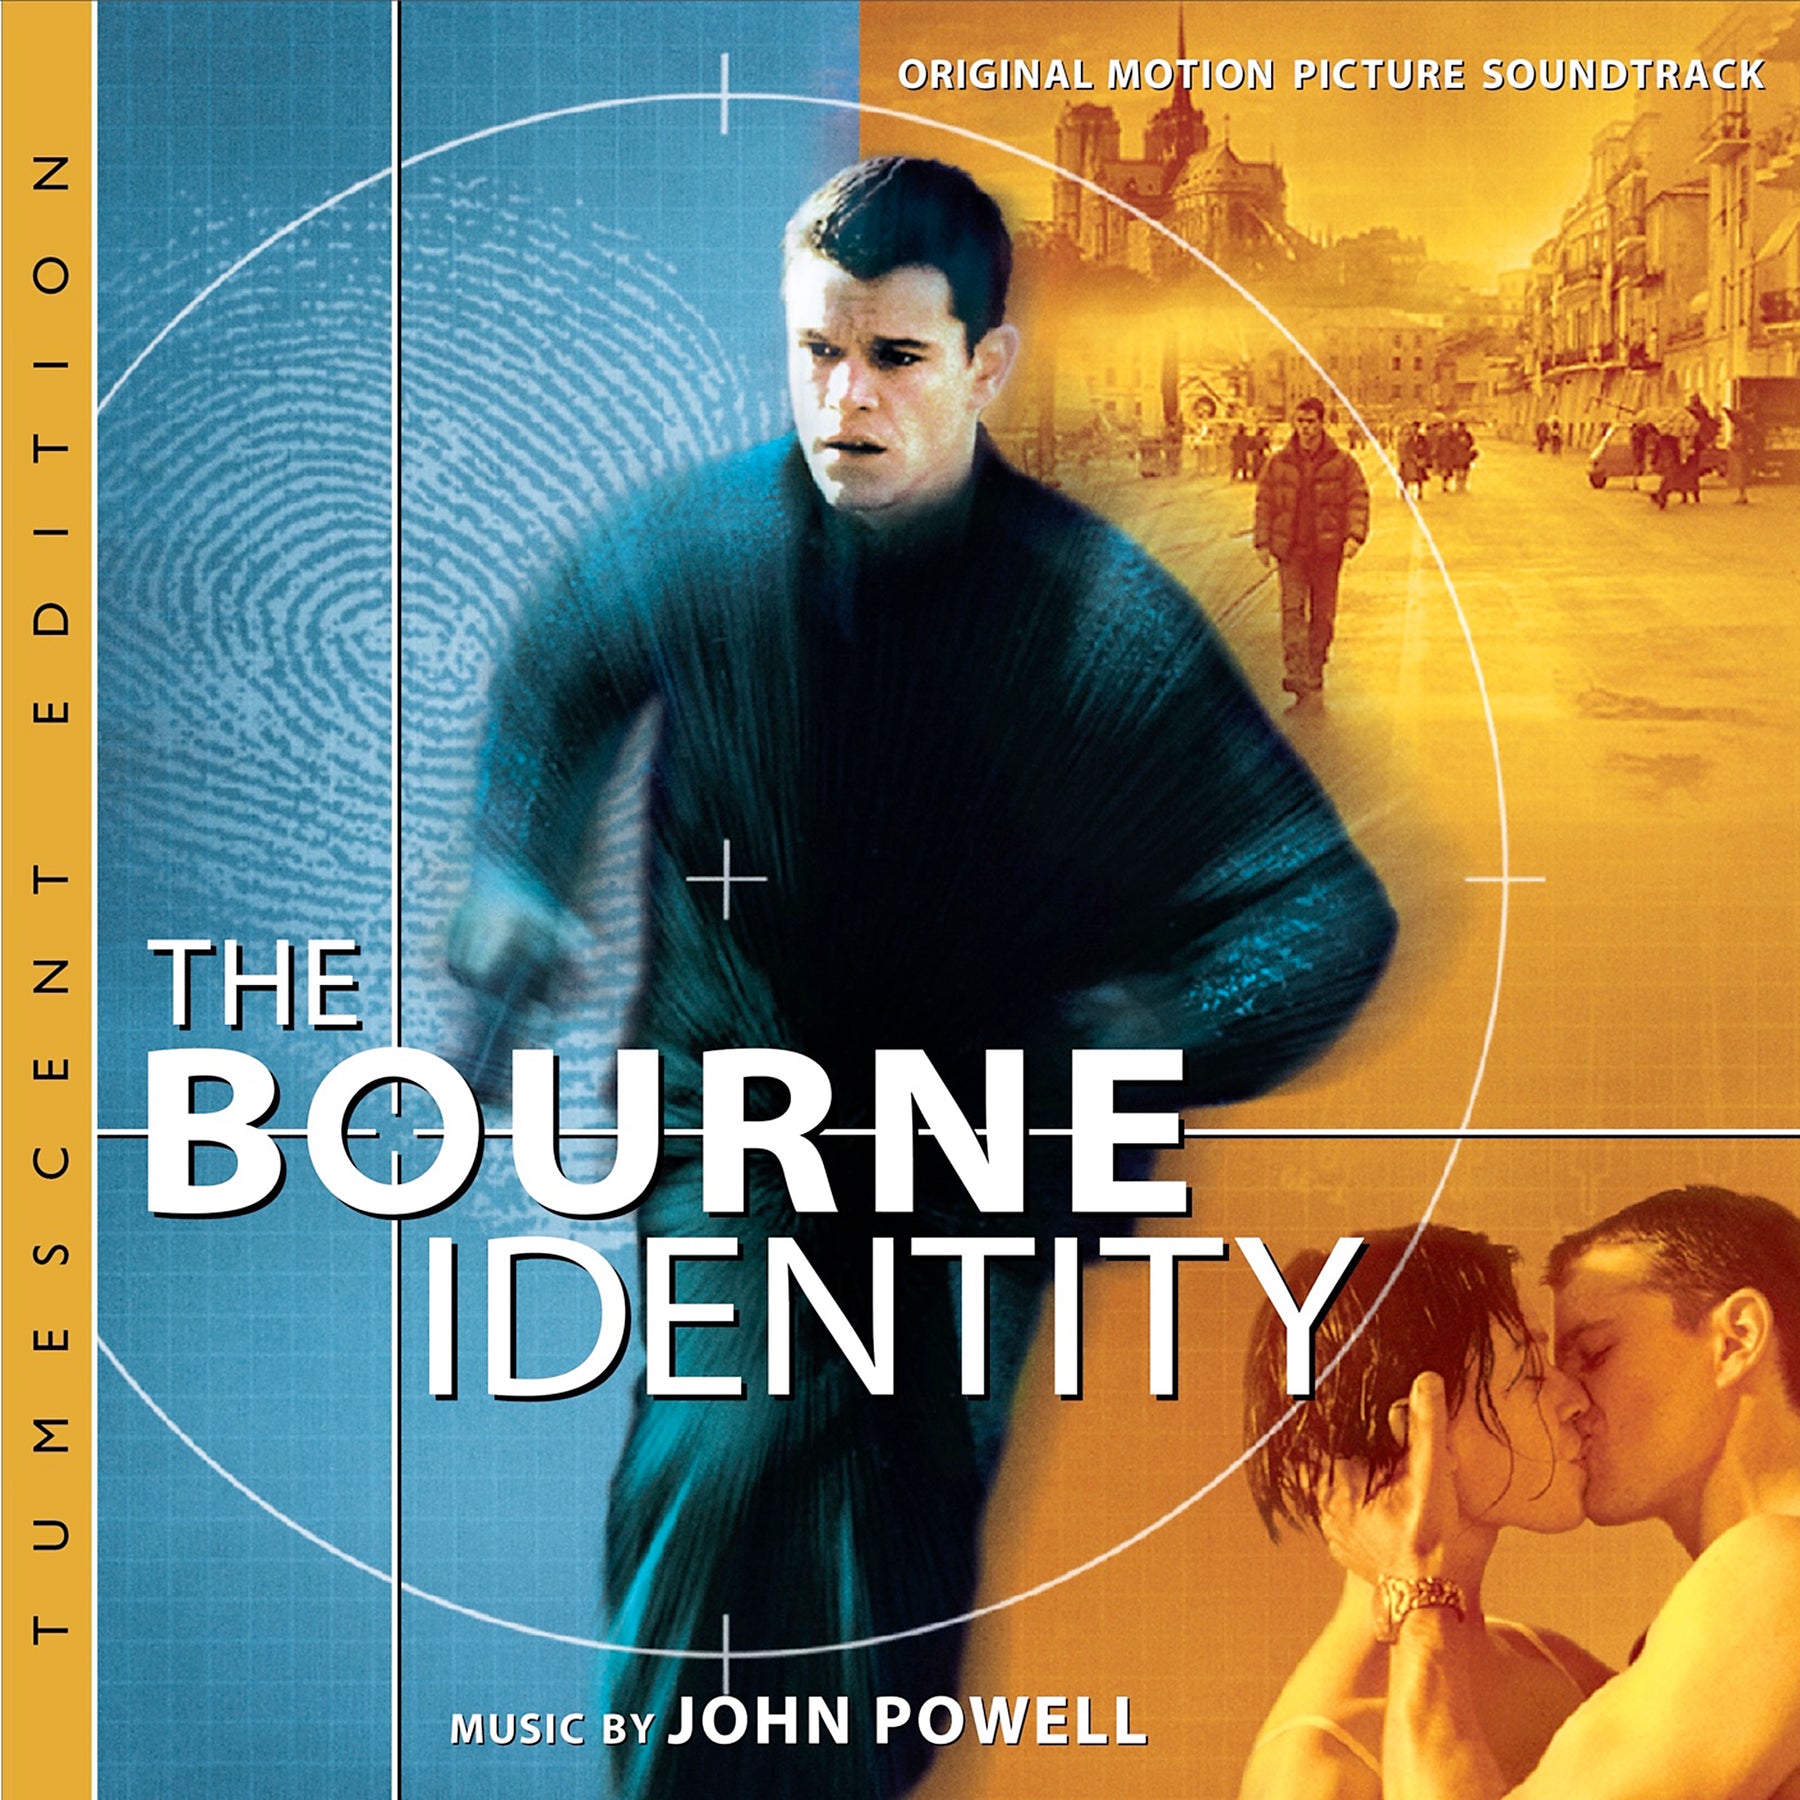 BOURNE_IDENTITY_Deluxe_Cover_Banner_1800